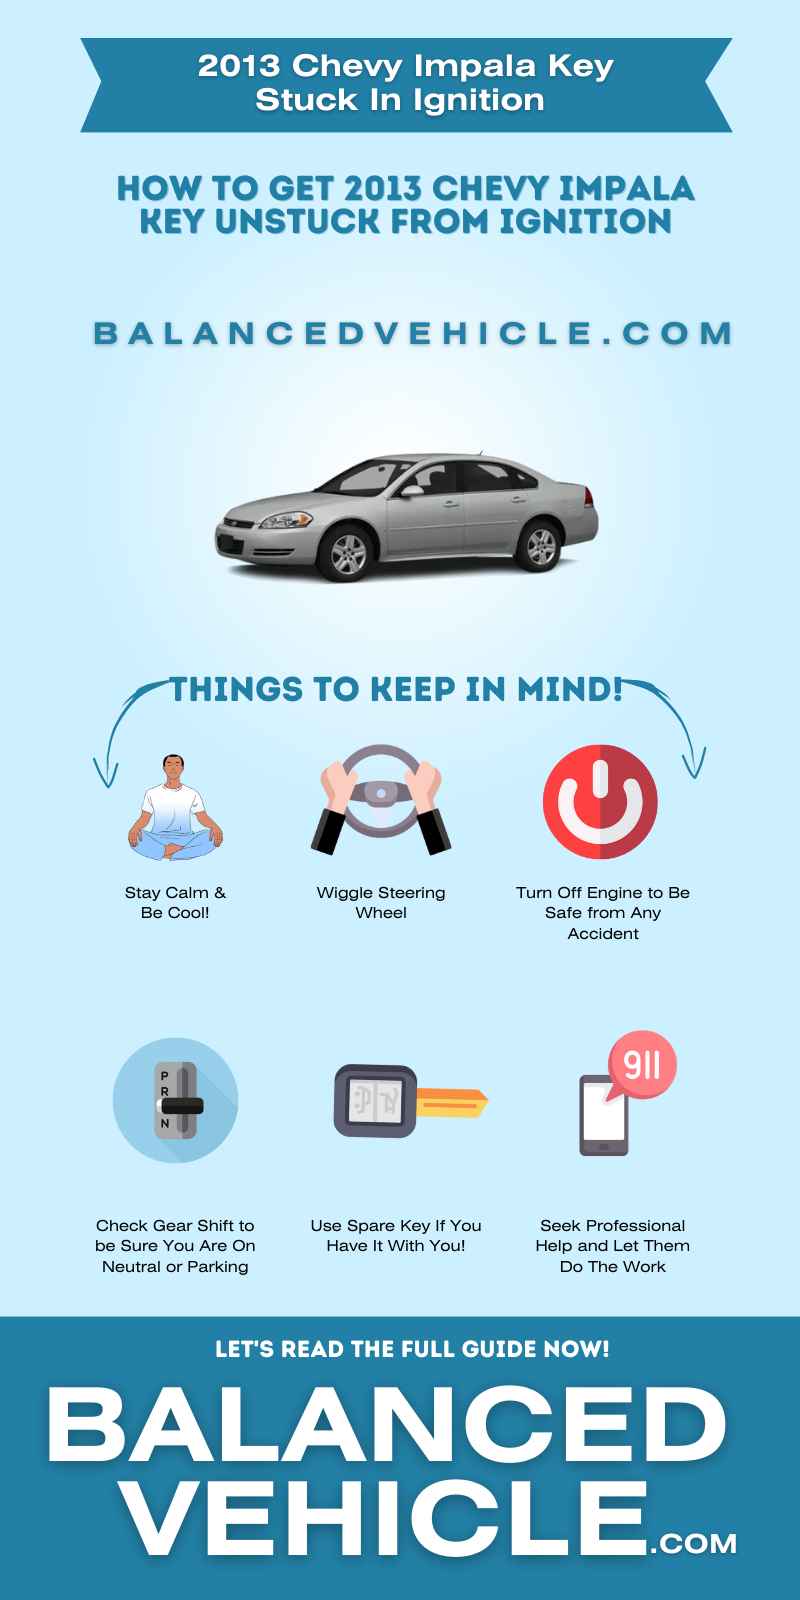 2013 Chevy Impala Key Stuck In Ignition - Infographic